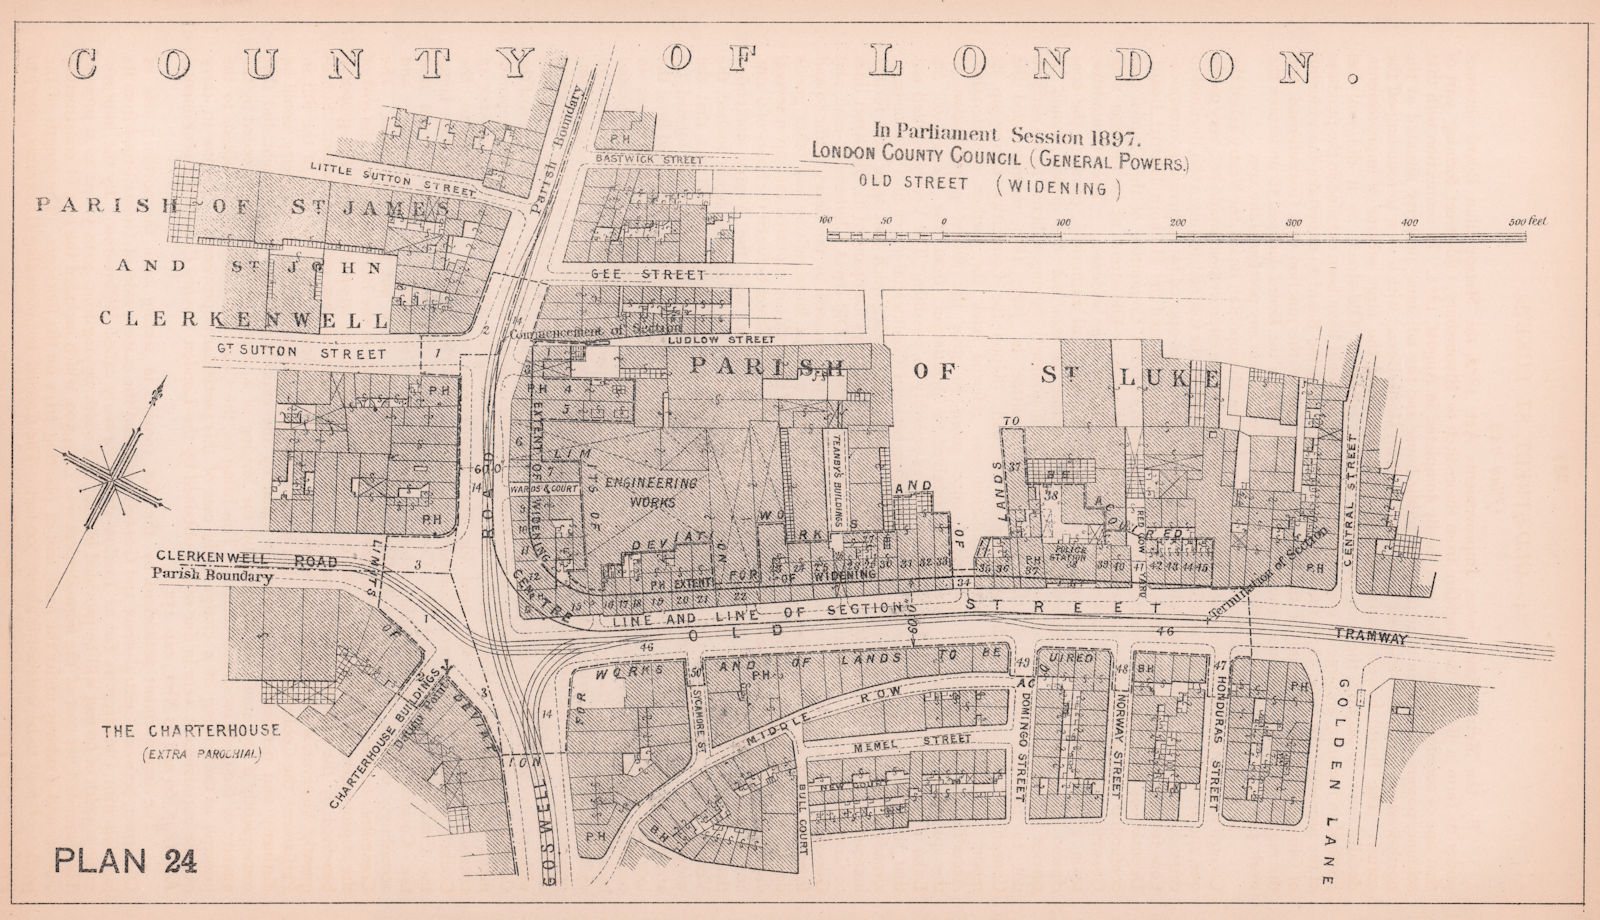 1897 Old Street widening. Clerkenwell Road & Goswell Road junction 1898 map